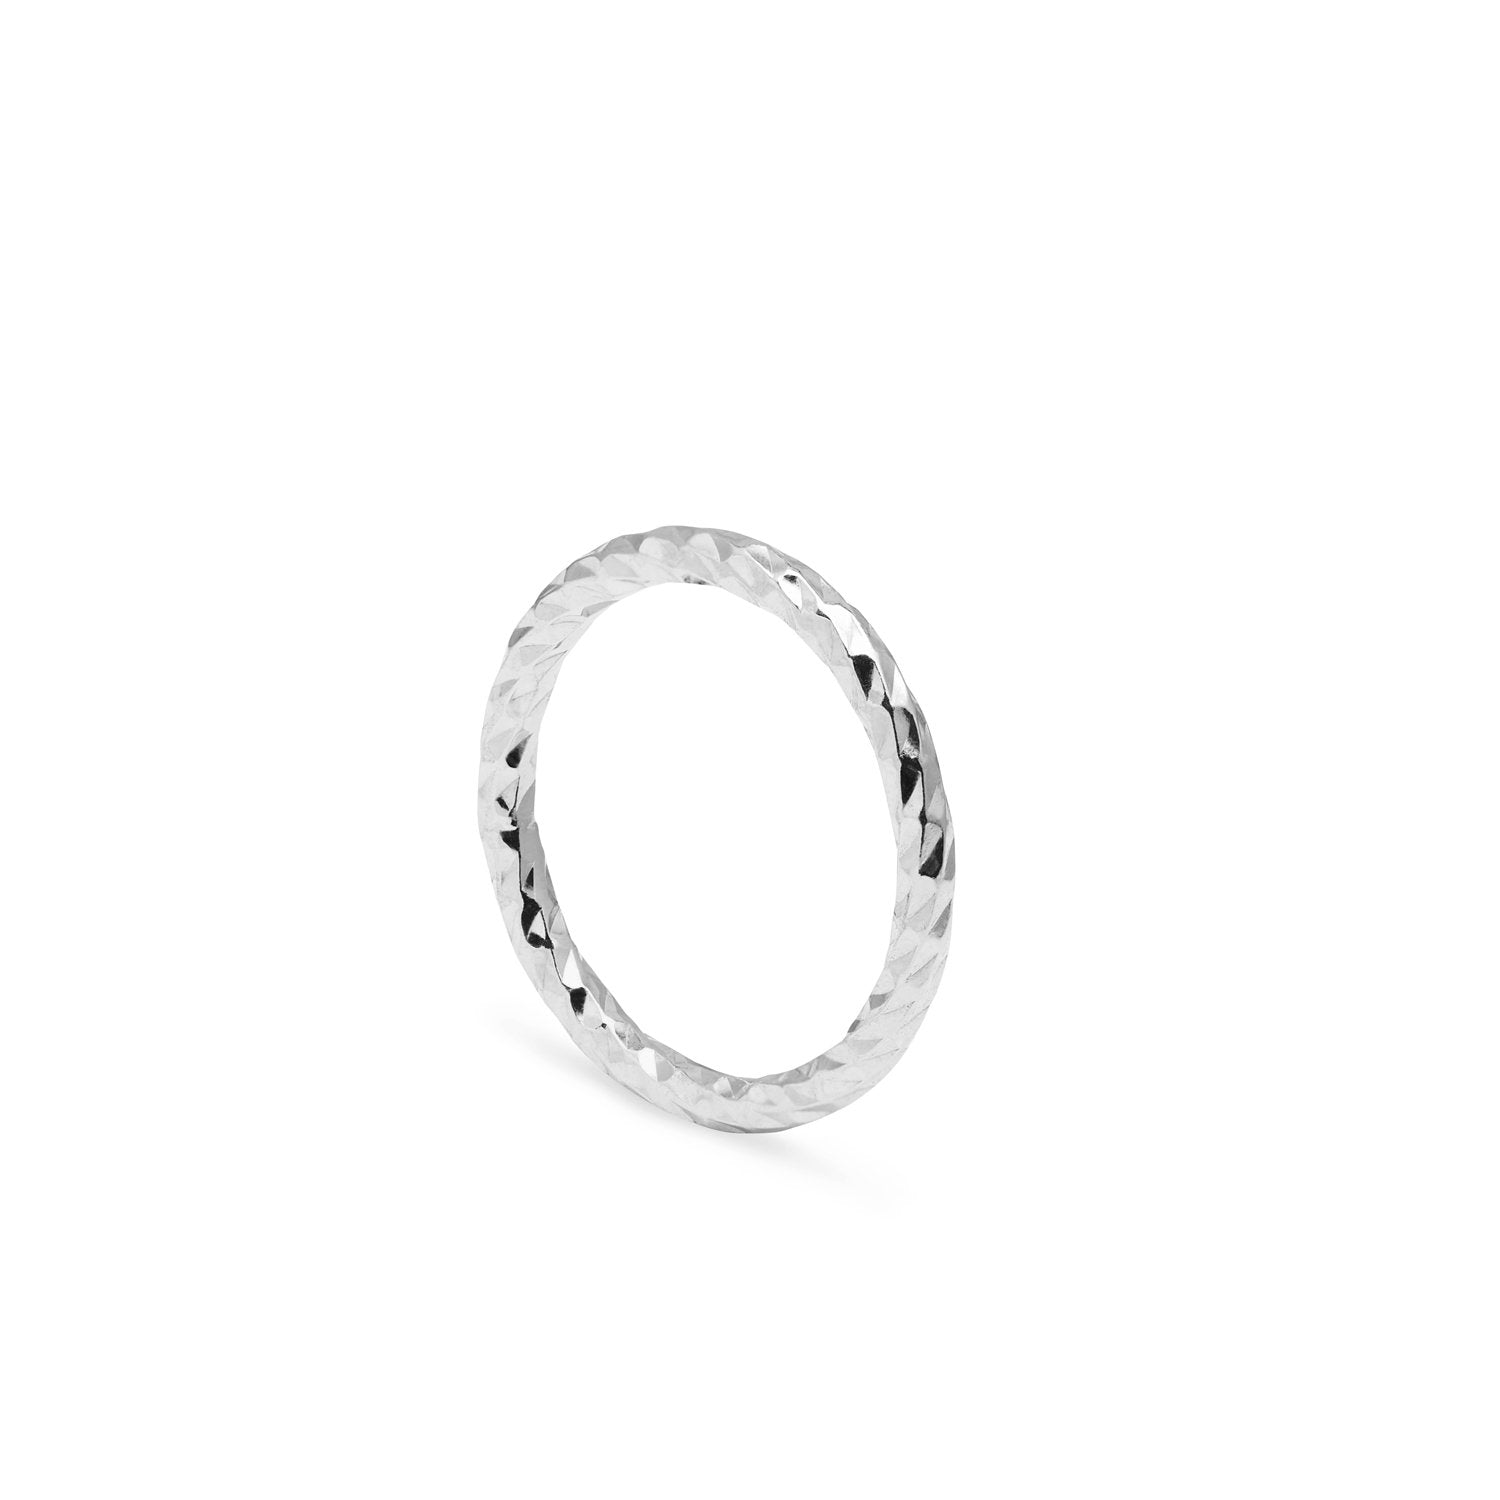 Faceted Diamond Band - Silver - Myia Bonner Jewellery